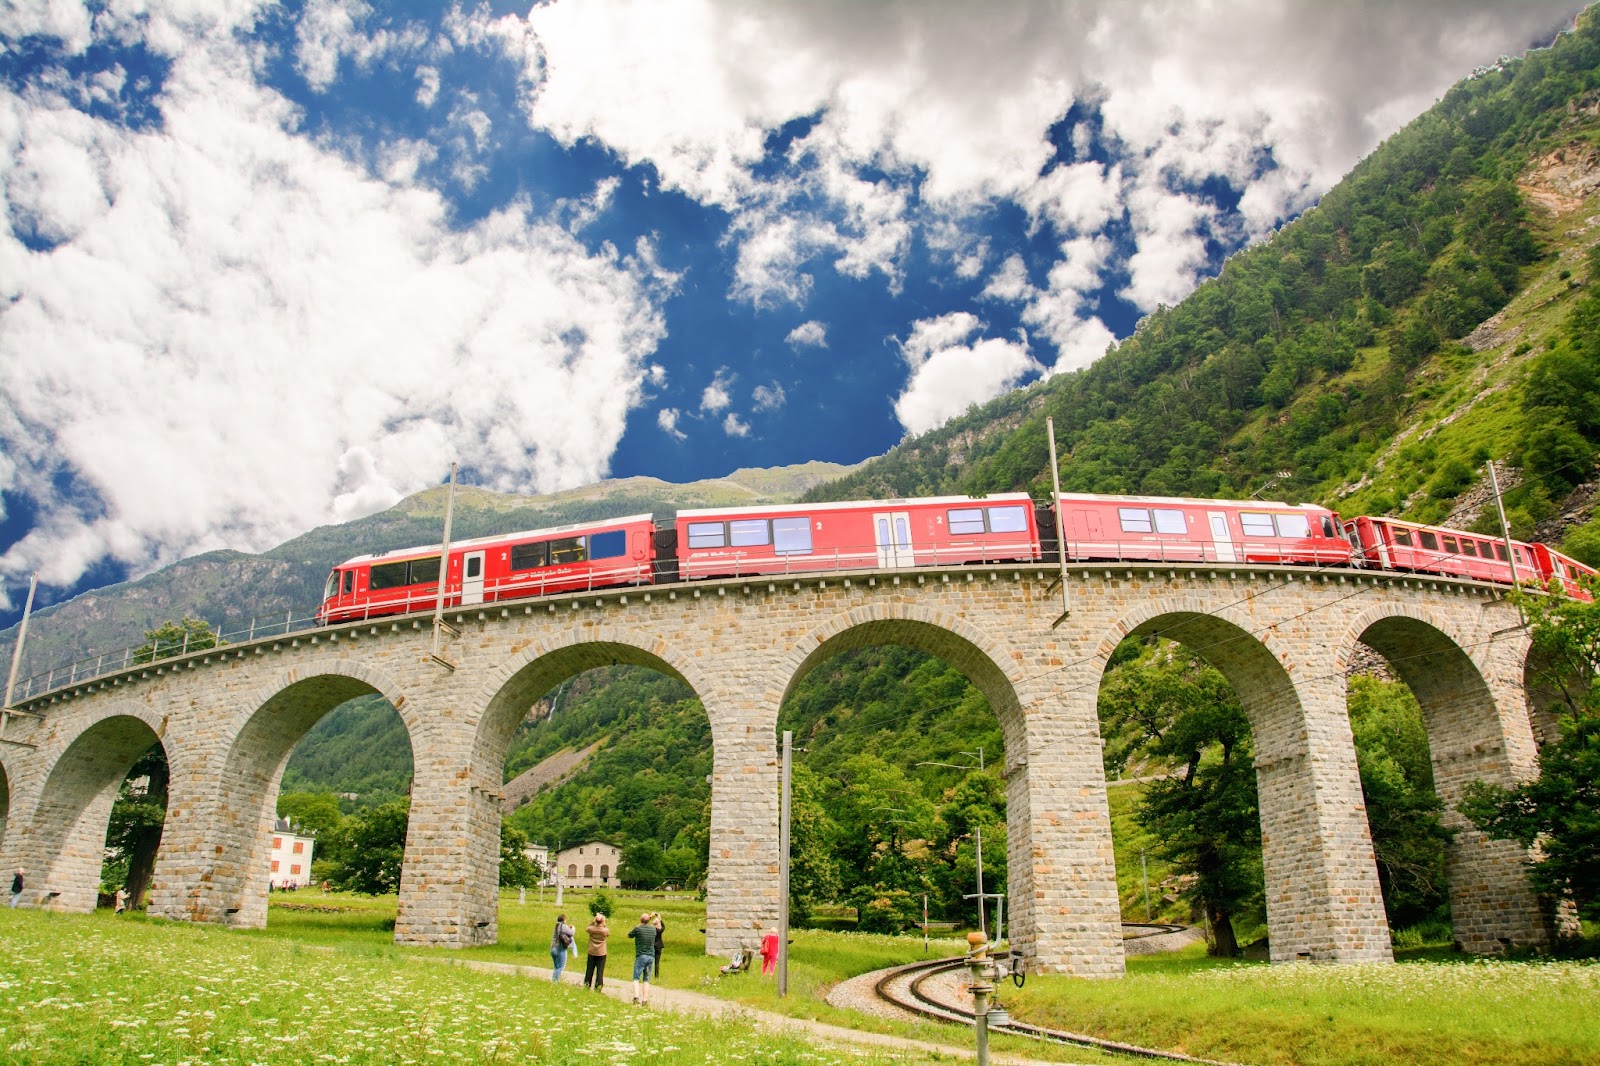 A scenic train connecting you to the heart of Europe.
